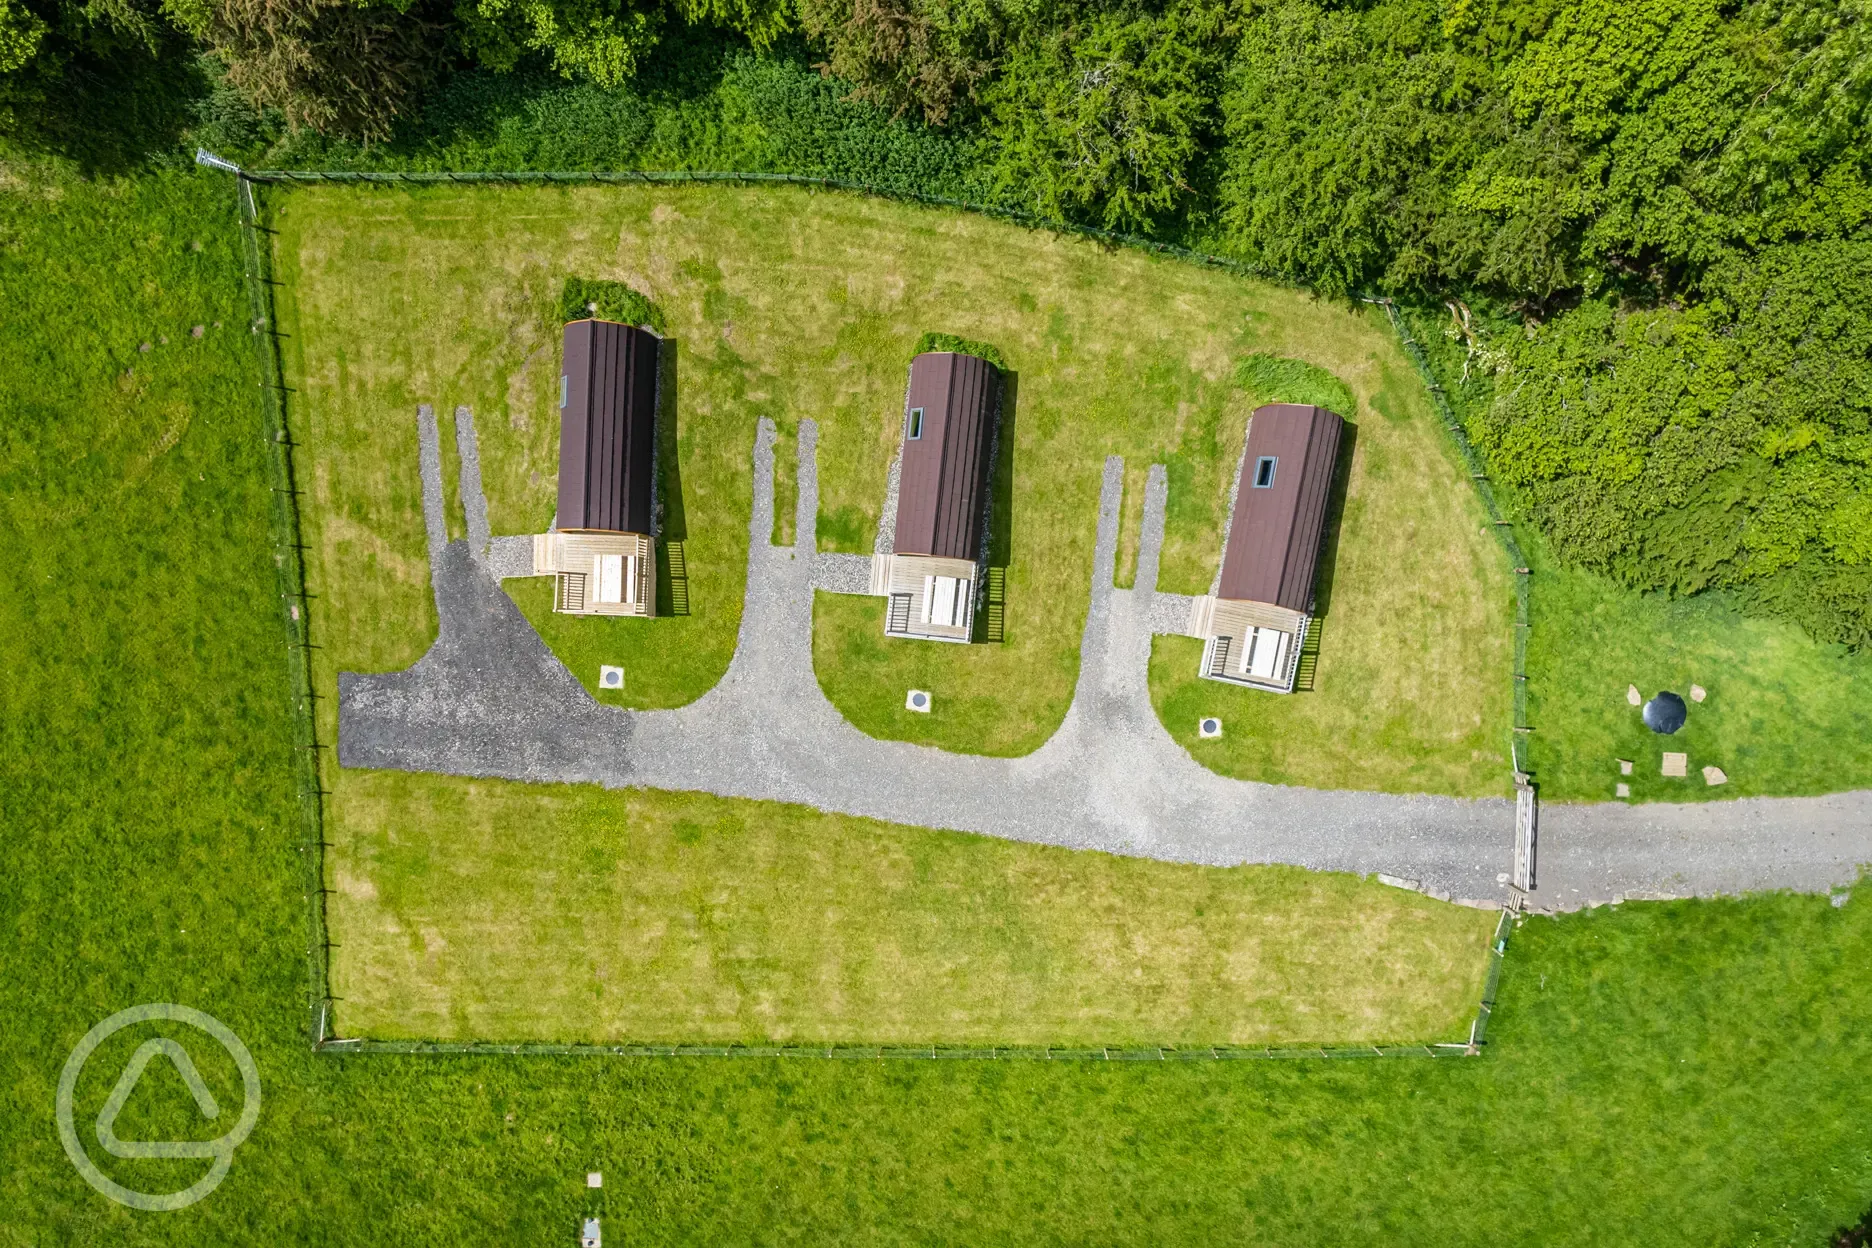 Birdseye view of the camping pods